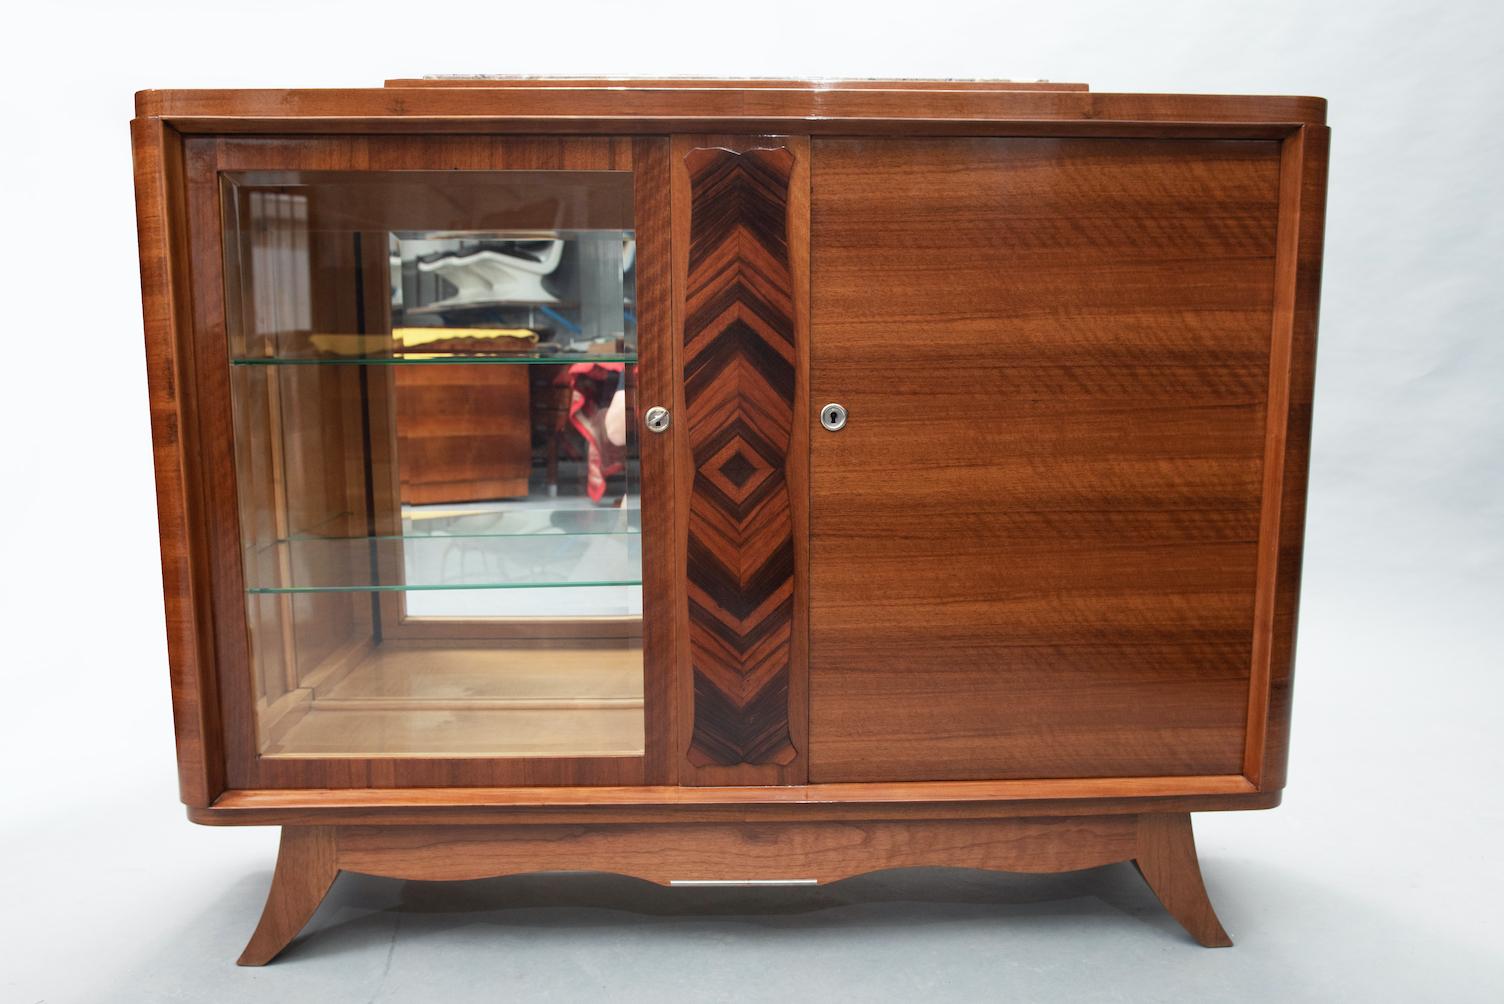 Rosewood and Macassar ebony French Art Deco small sideboard. One of the doors is a display cabinet with glass shelves.